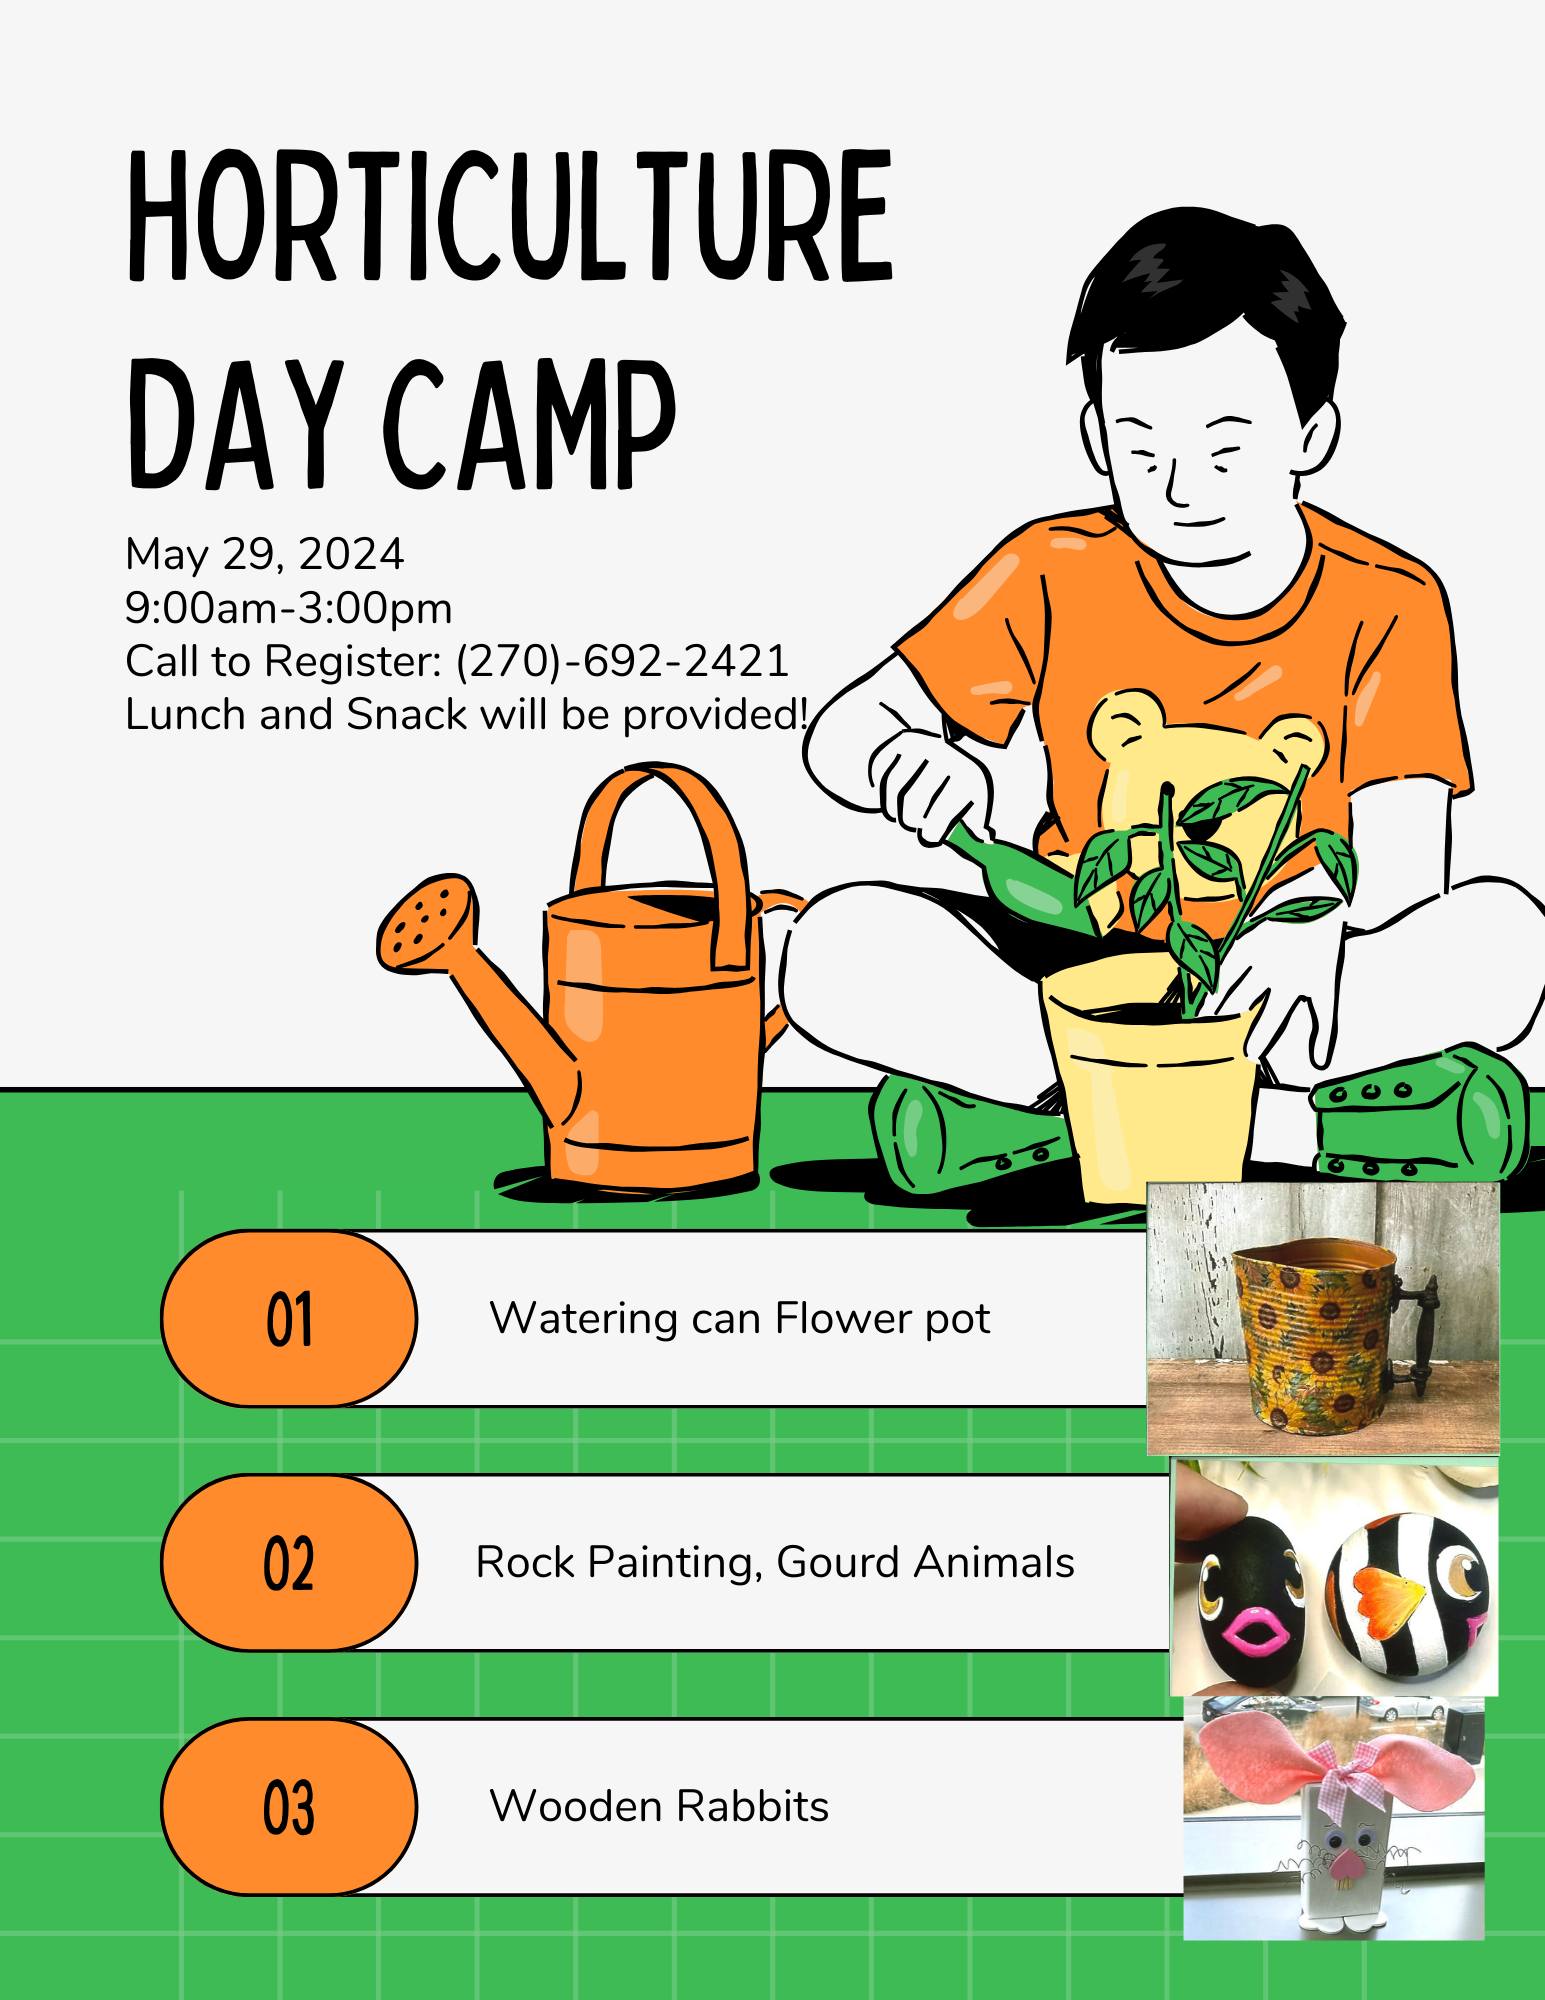 Horticulture Day Camp